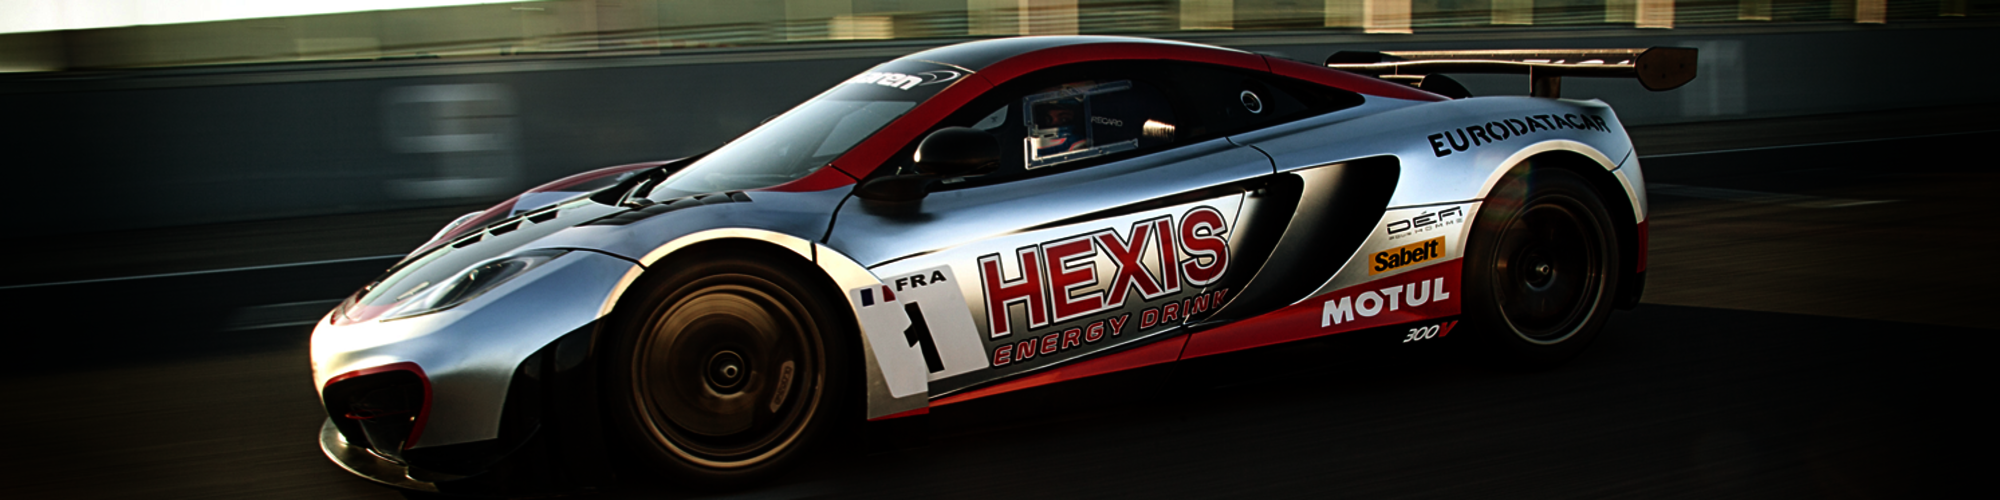 HEXIS cover image